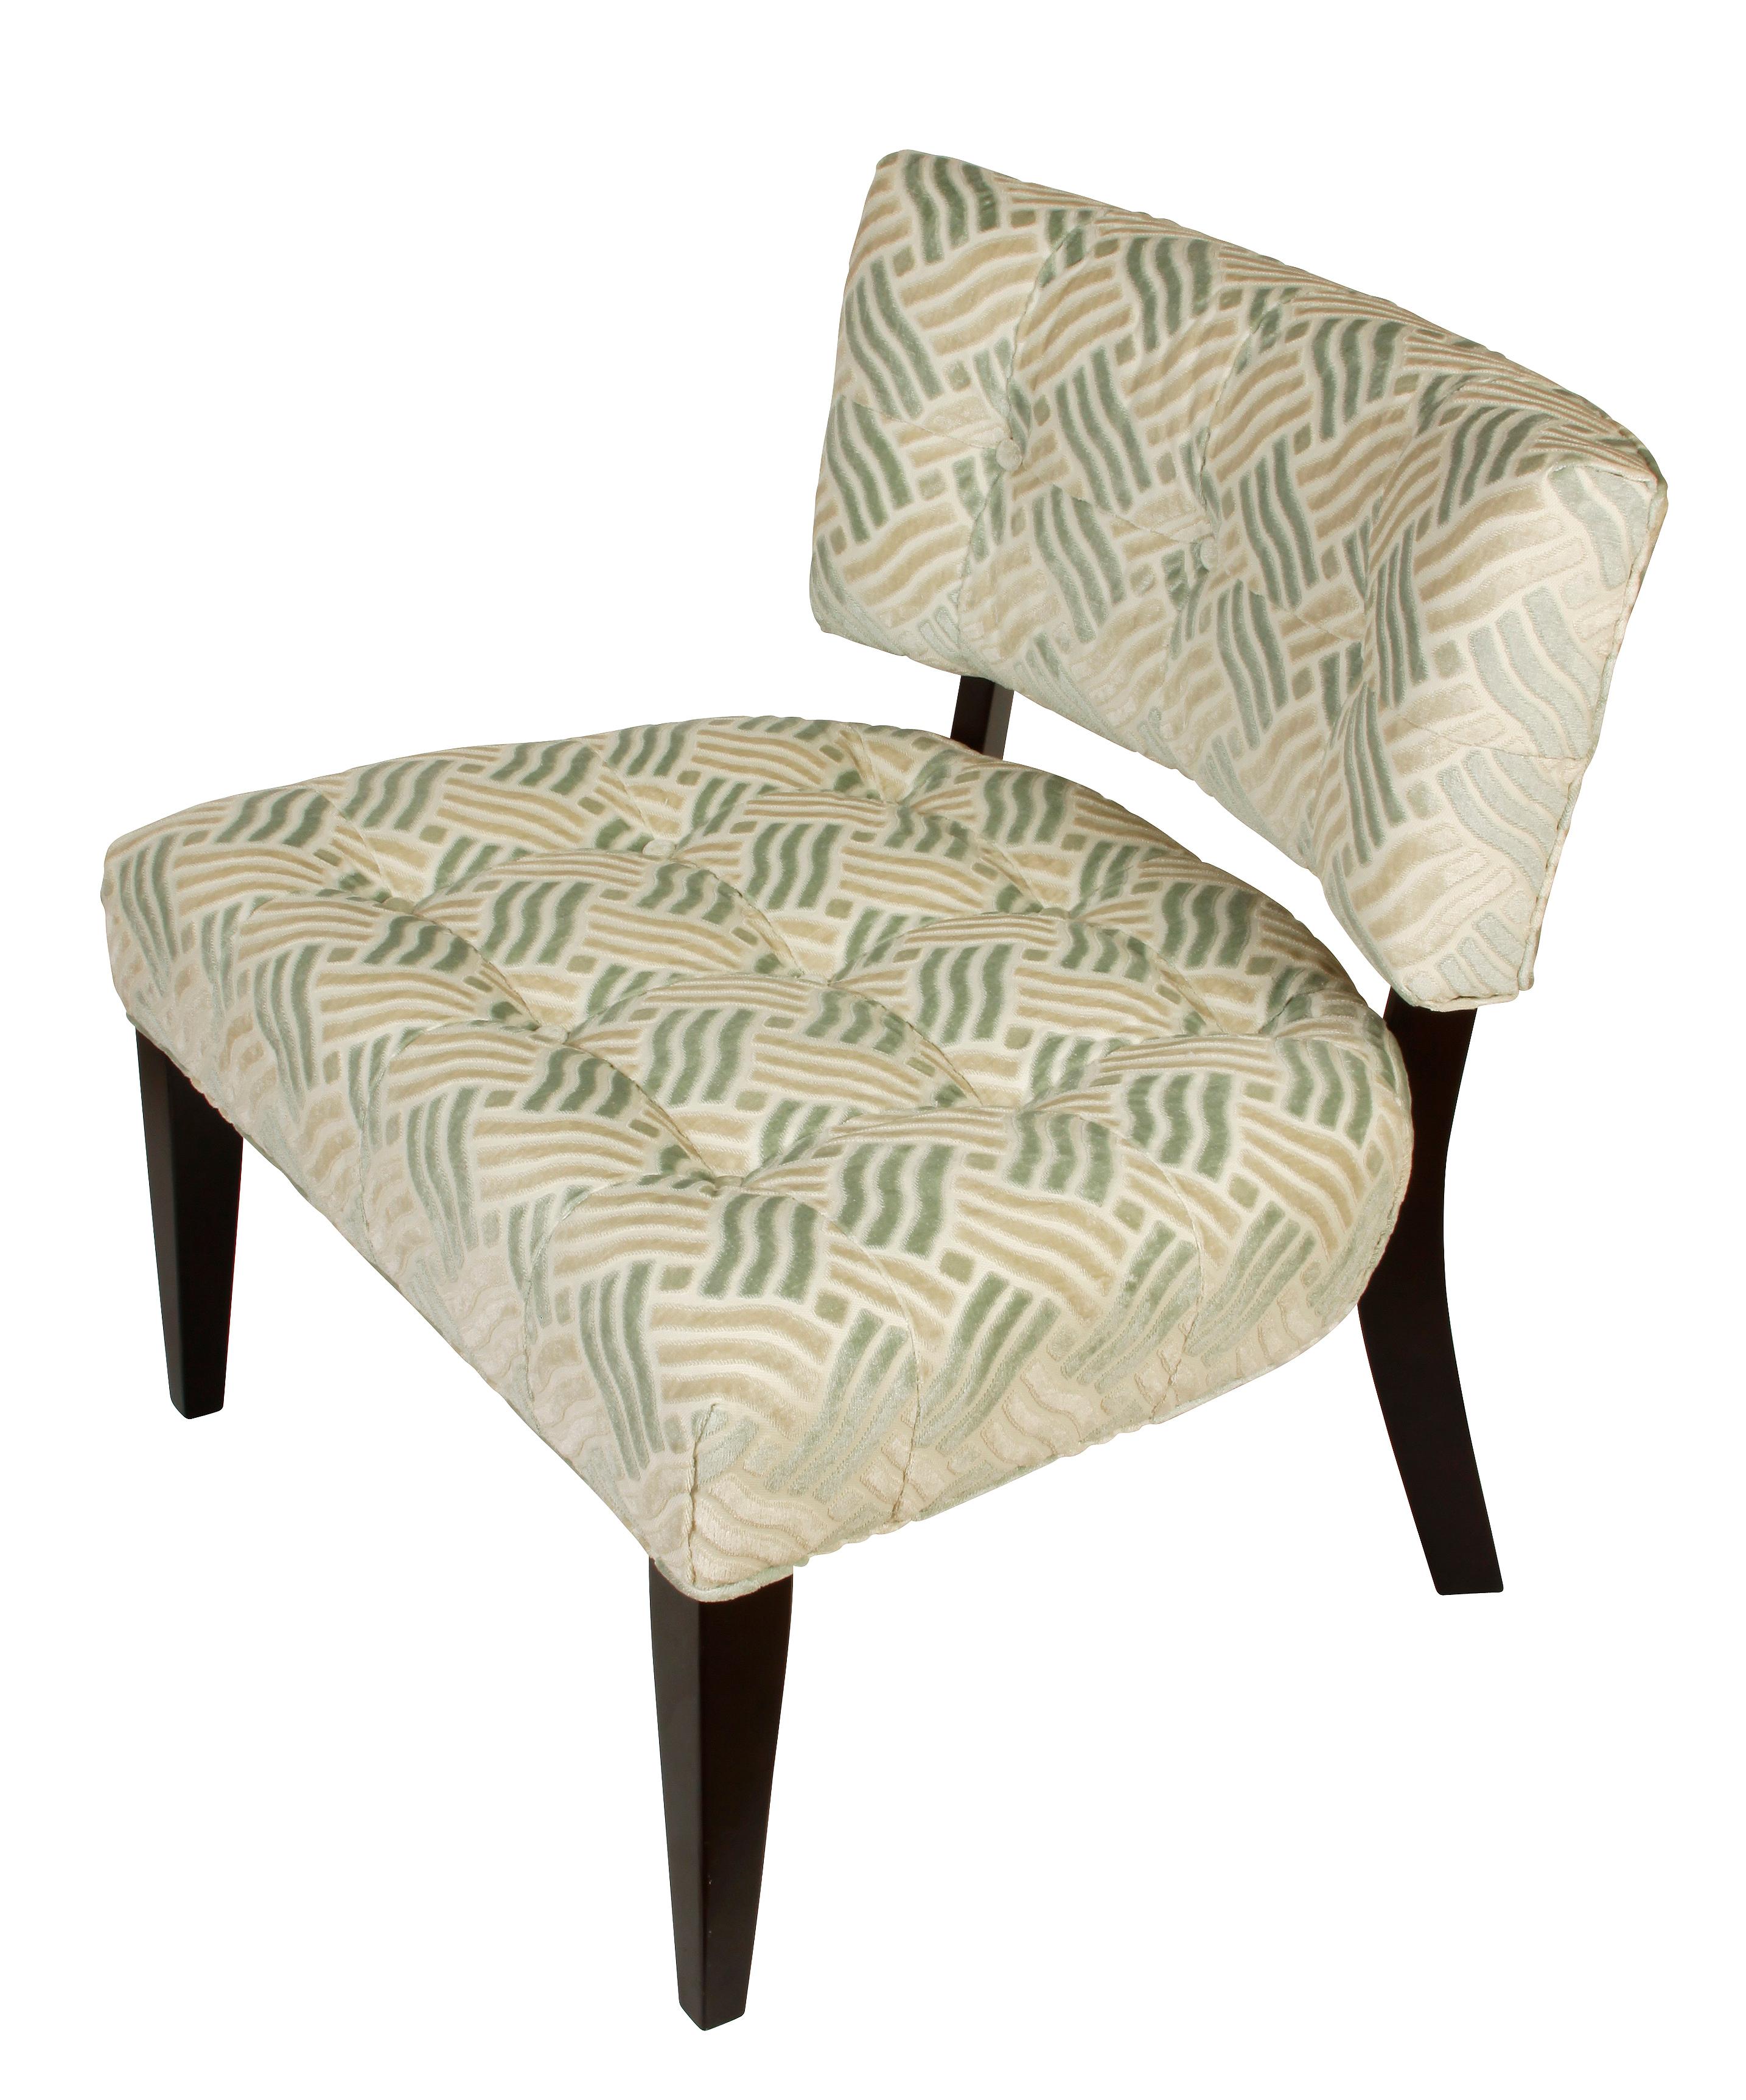 Pair of Low Mid-Century Modern Chairs in Fret Velvet Fabric In Good Condition For Sale In Locust Valley, NY